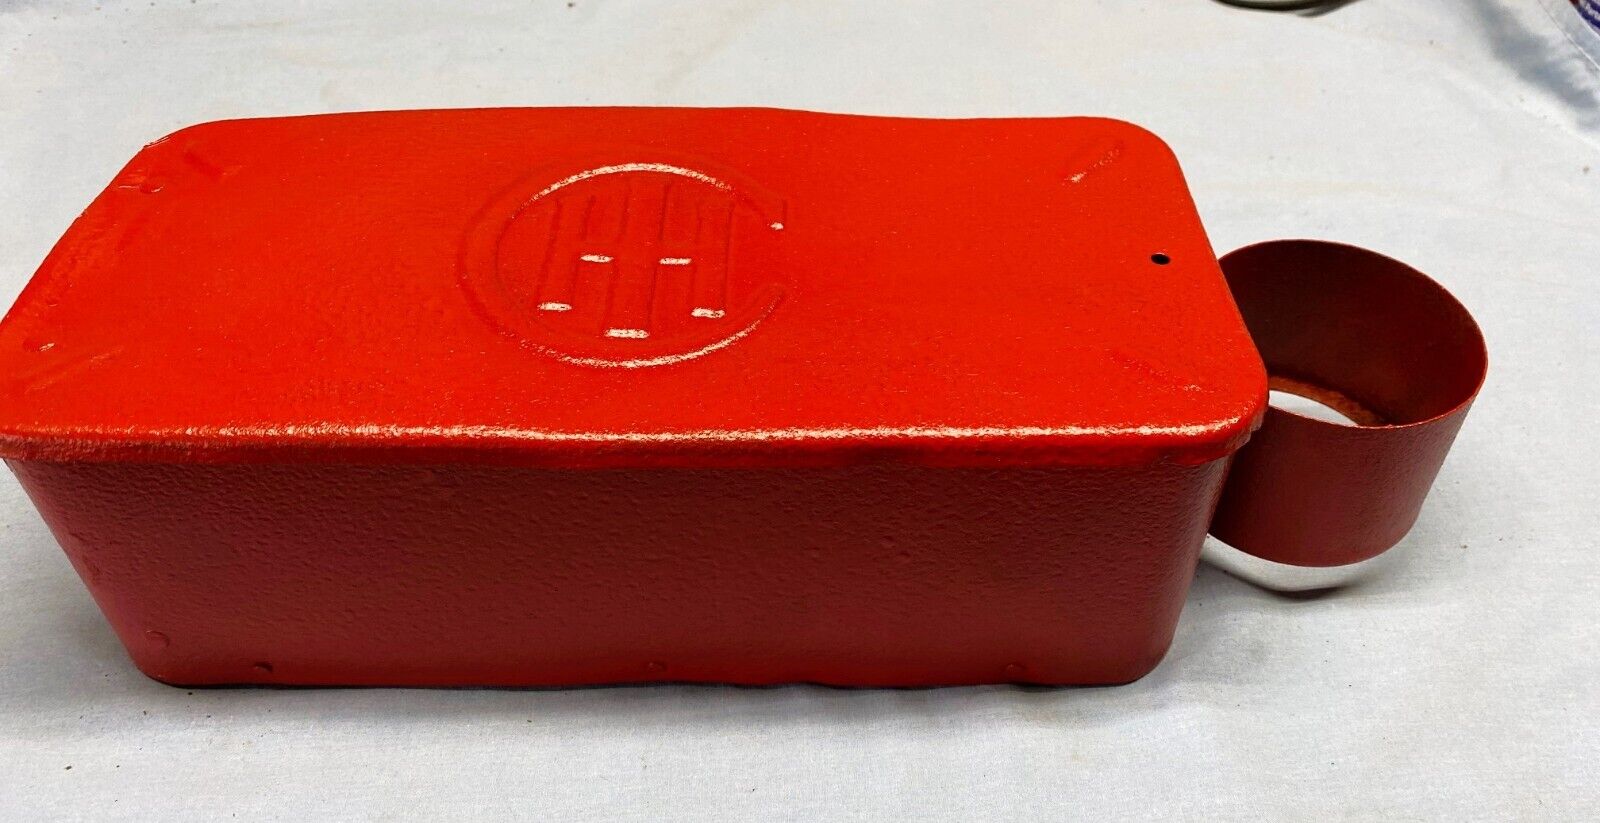 VINTAGE INTERNATIONAL HARVESTER TRACTOR METAL TOOL BOX WITH OIL CAN HOLDER